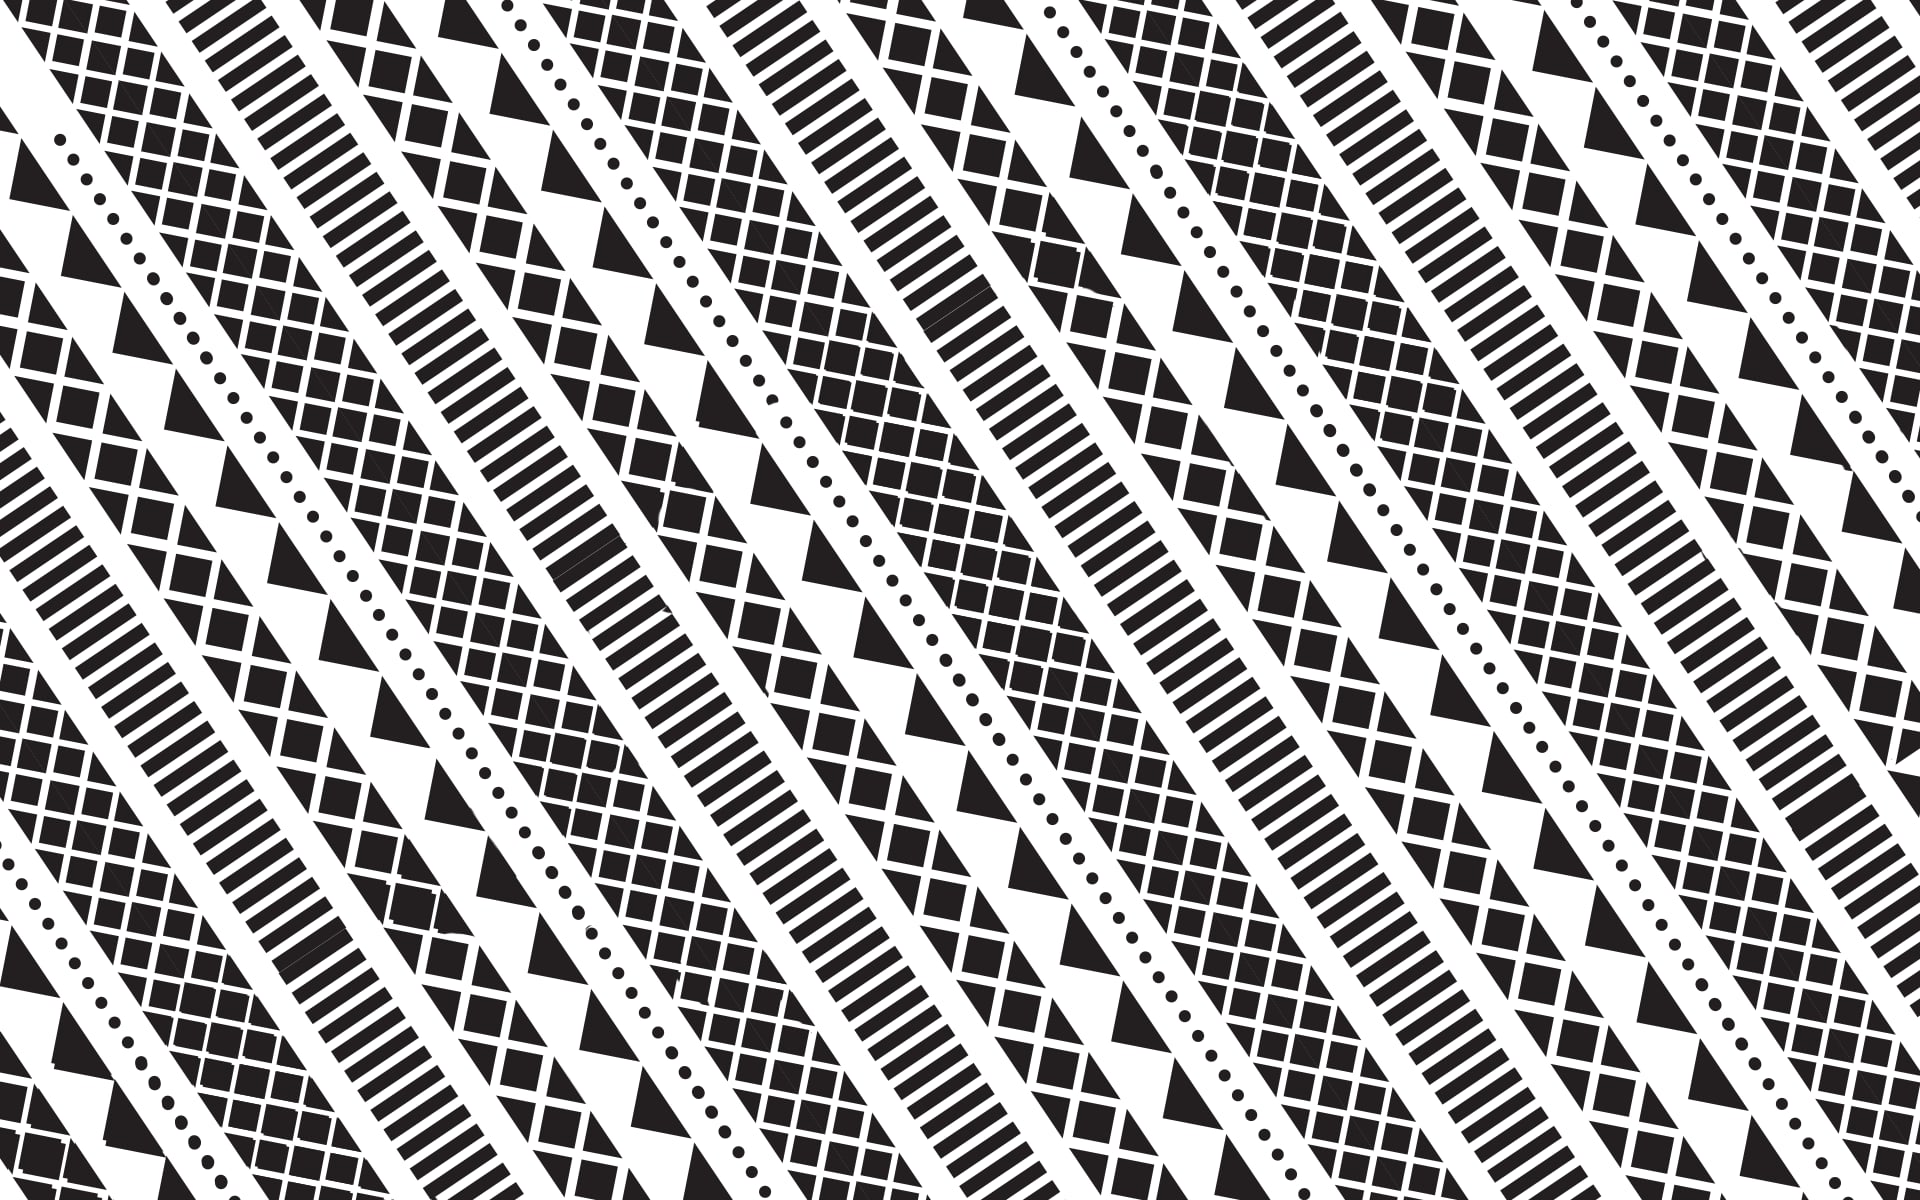 Tribal 30 Pretty Iphone Wallpapers That Don T Cost A Thing Popsugar Tech Photo 30